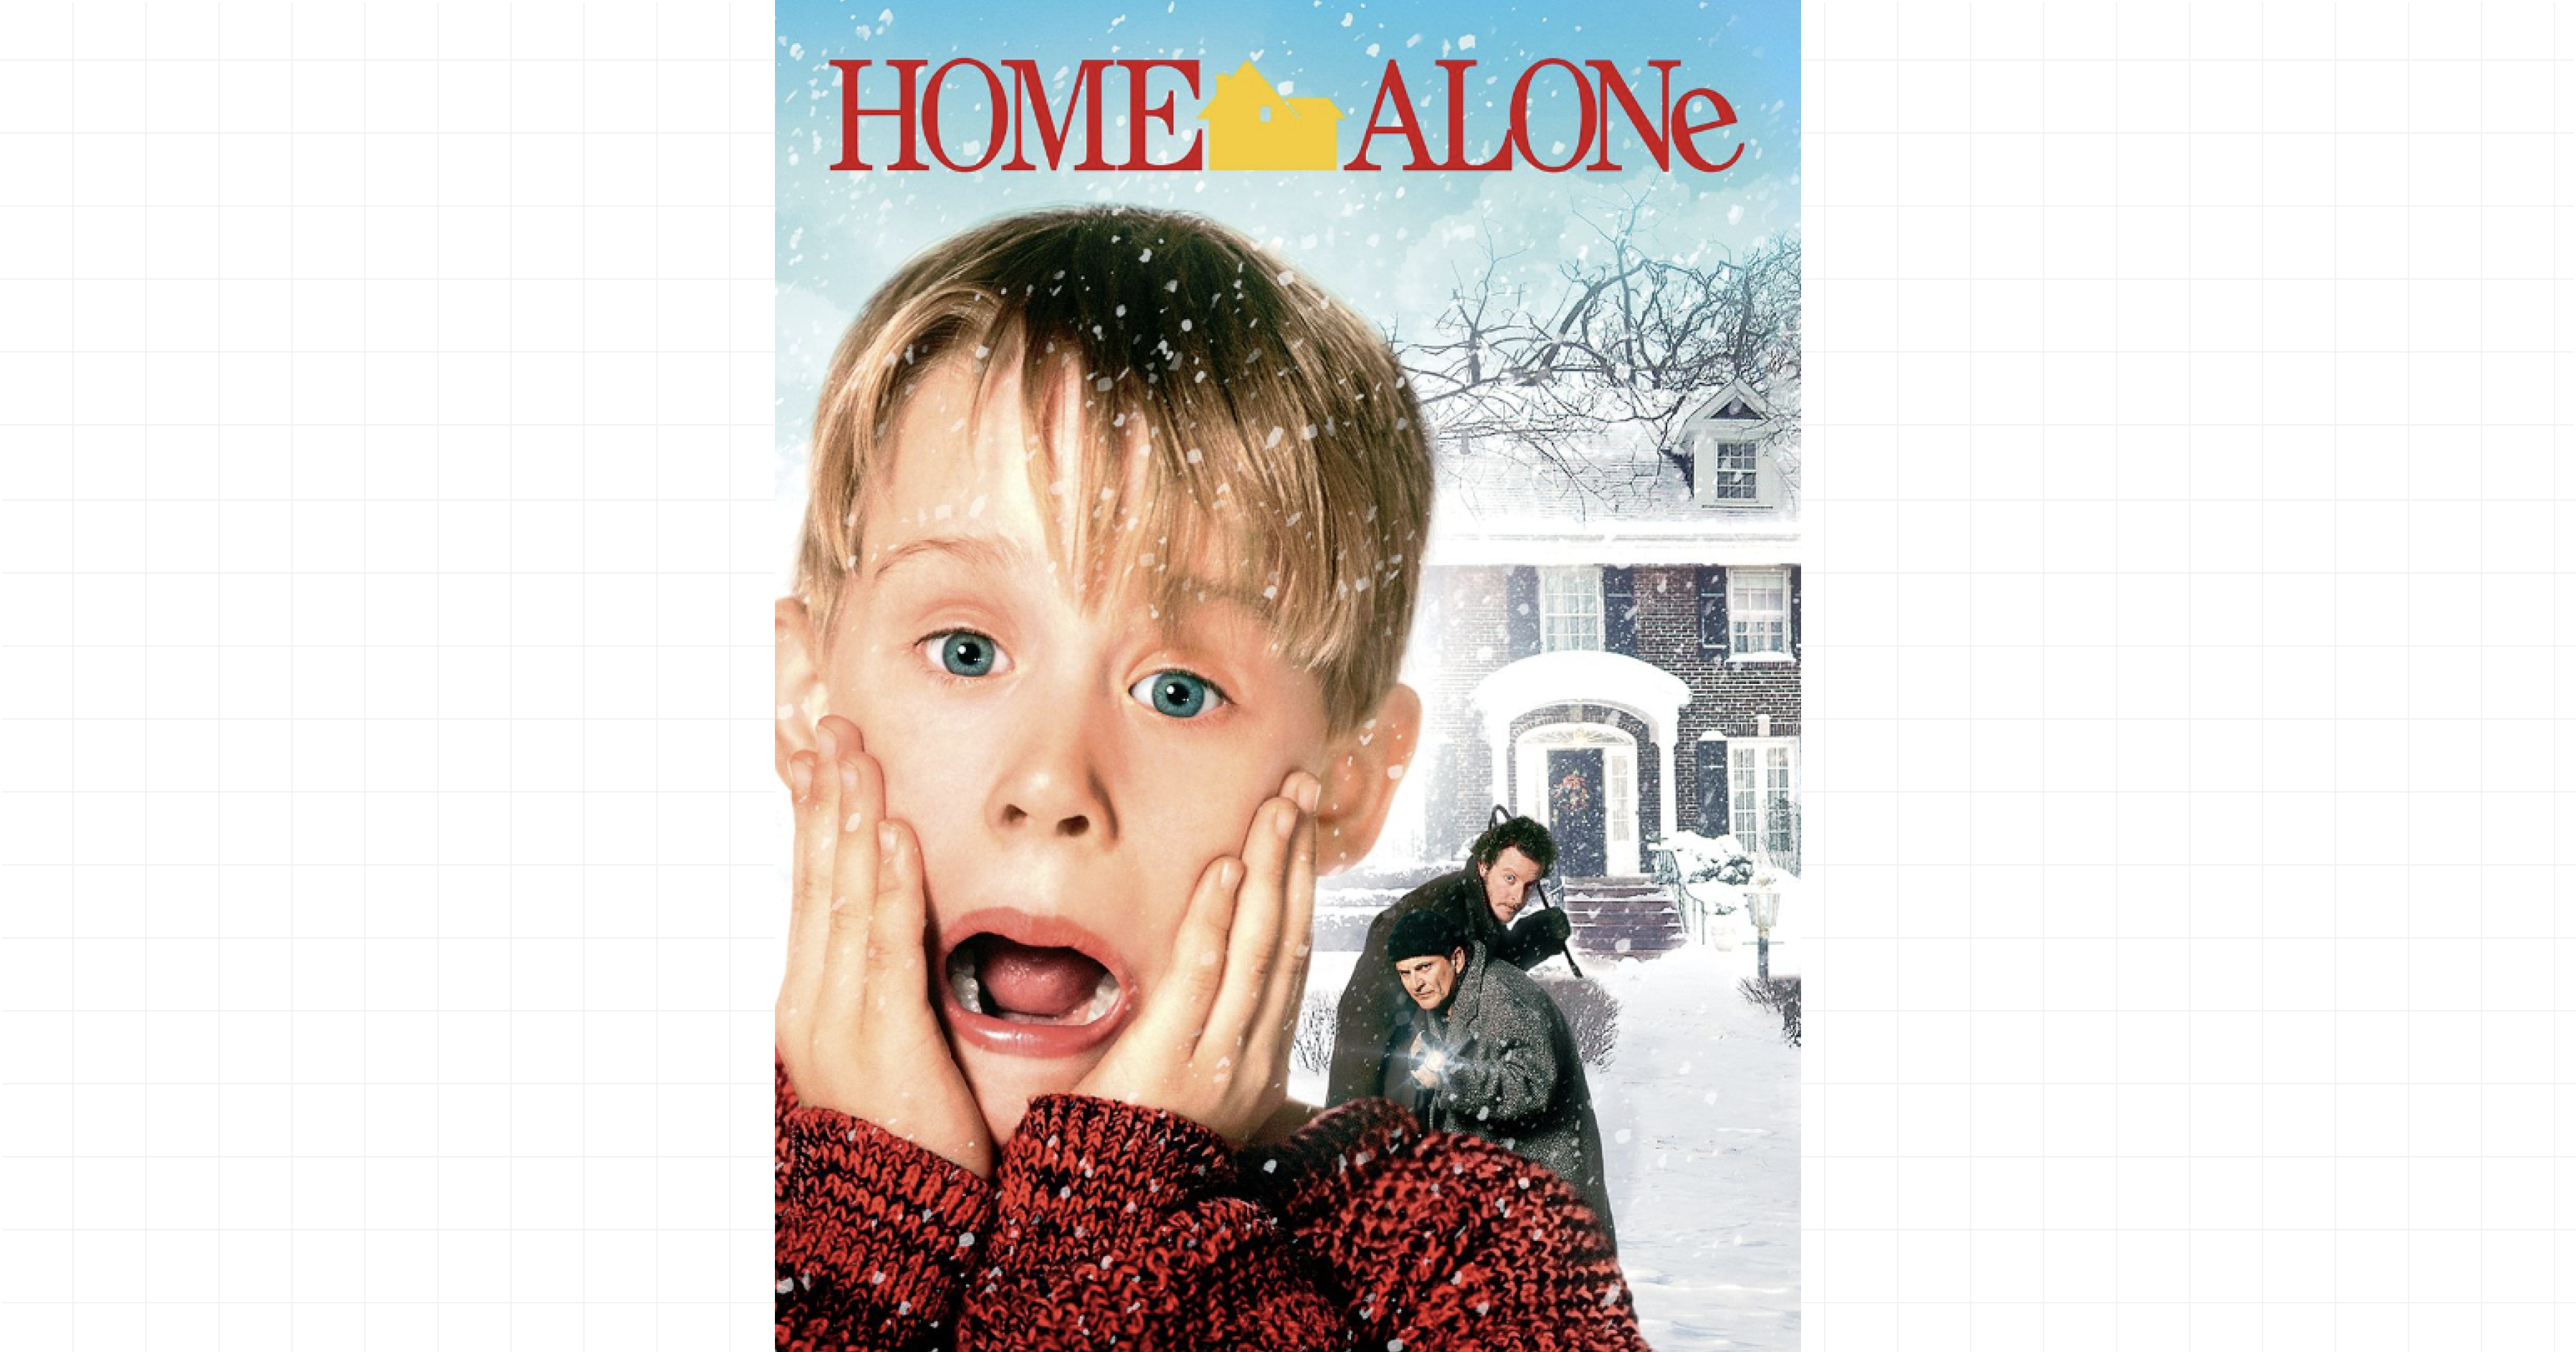 Home Alone movie poster